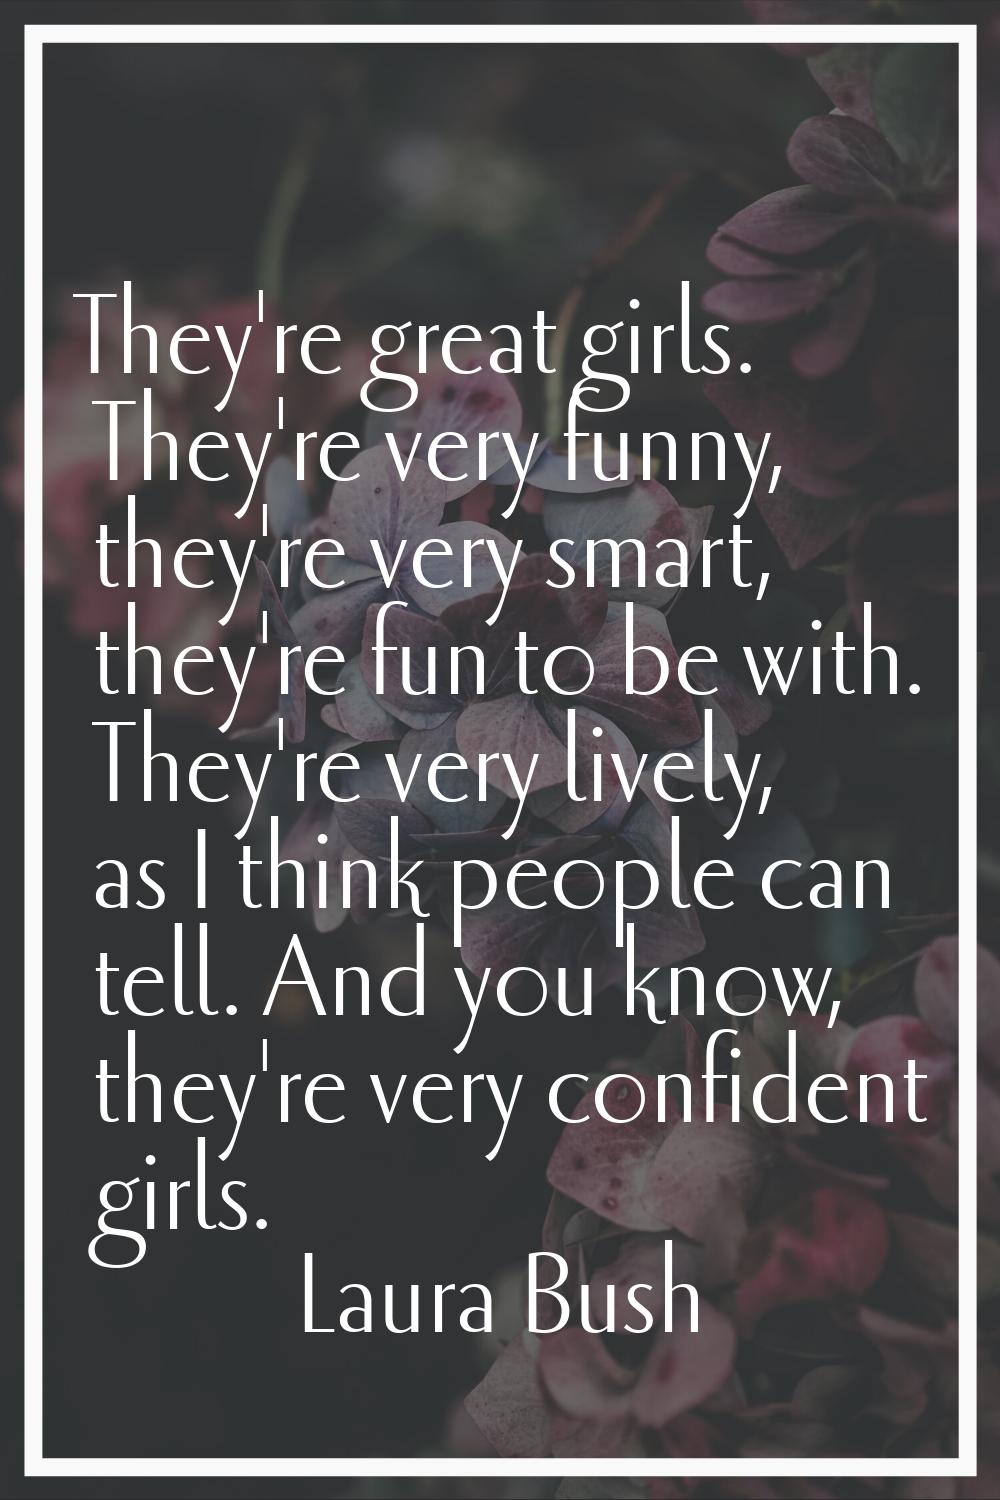 They're great girls. They're very funny, they're very smart, they're fun to be with. They're very l